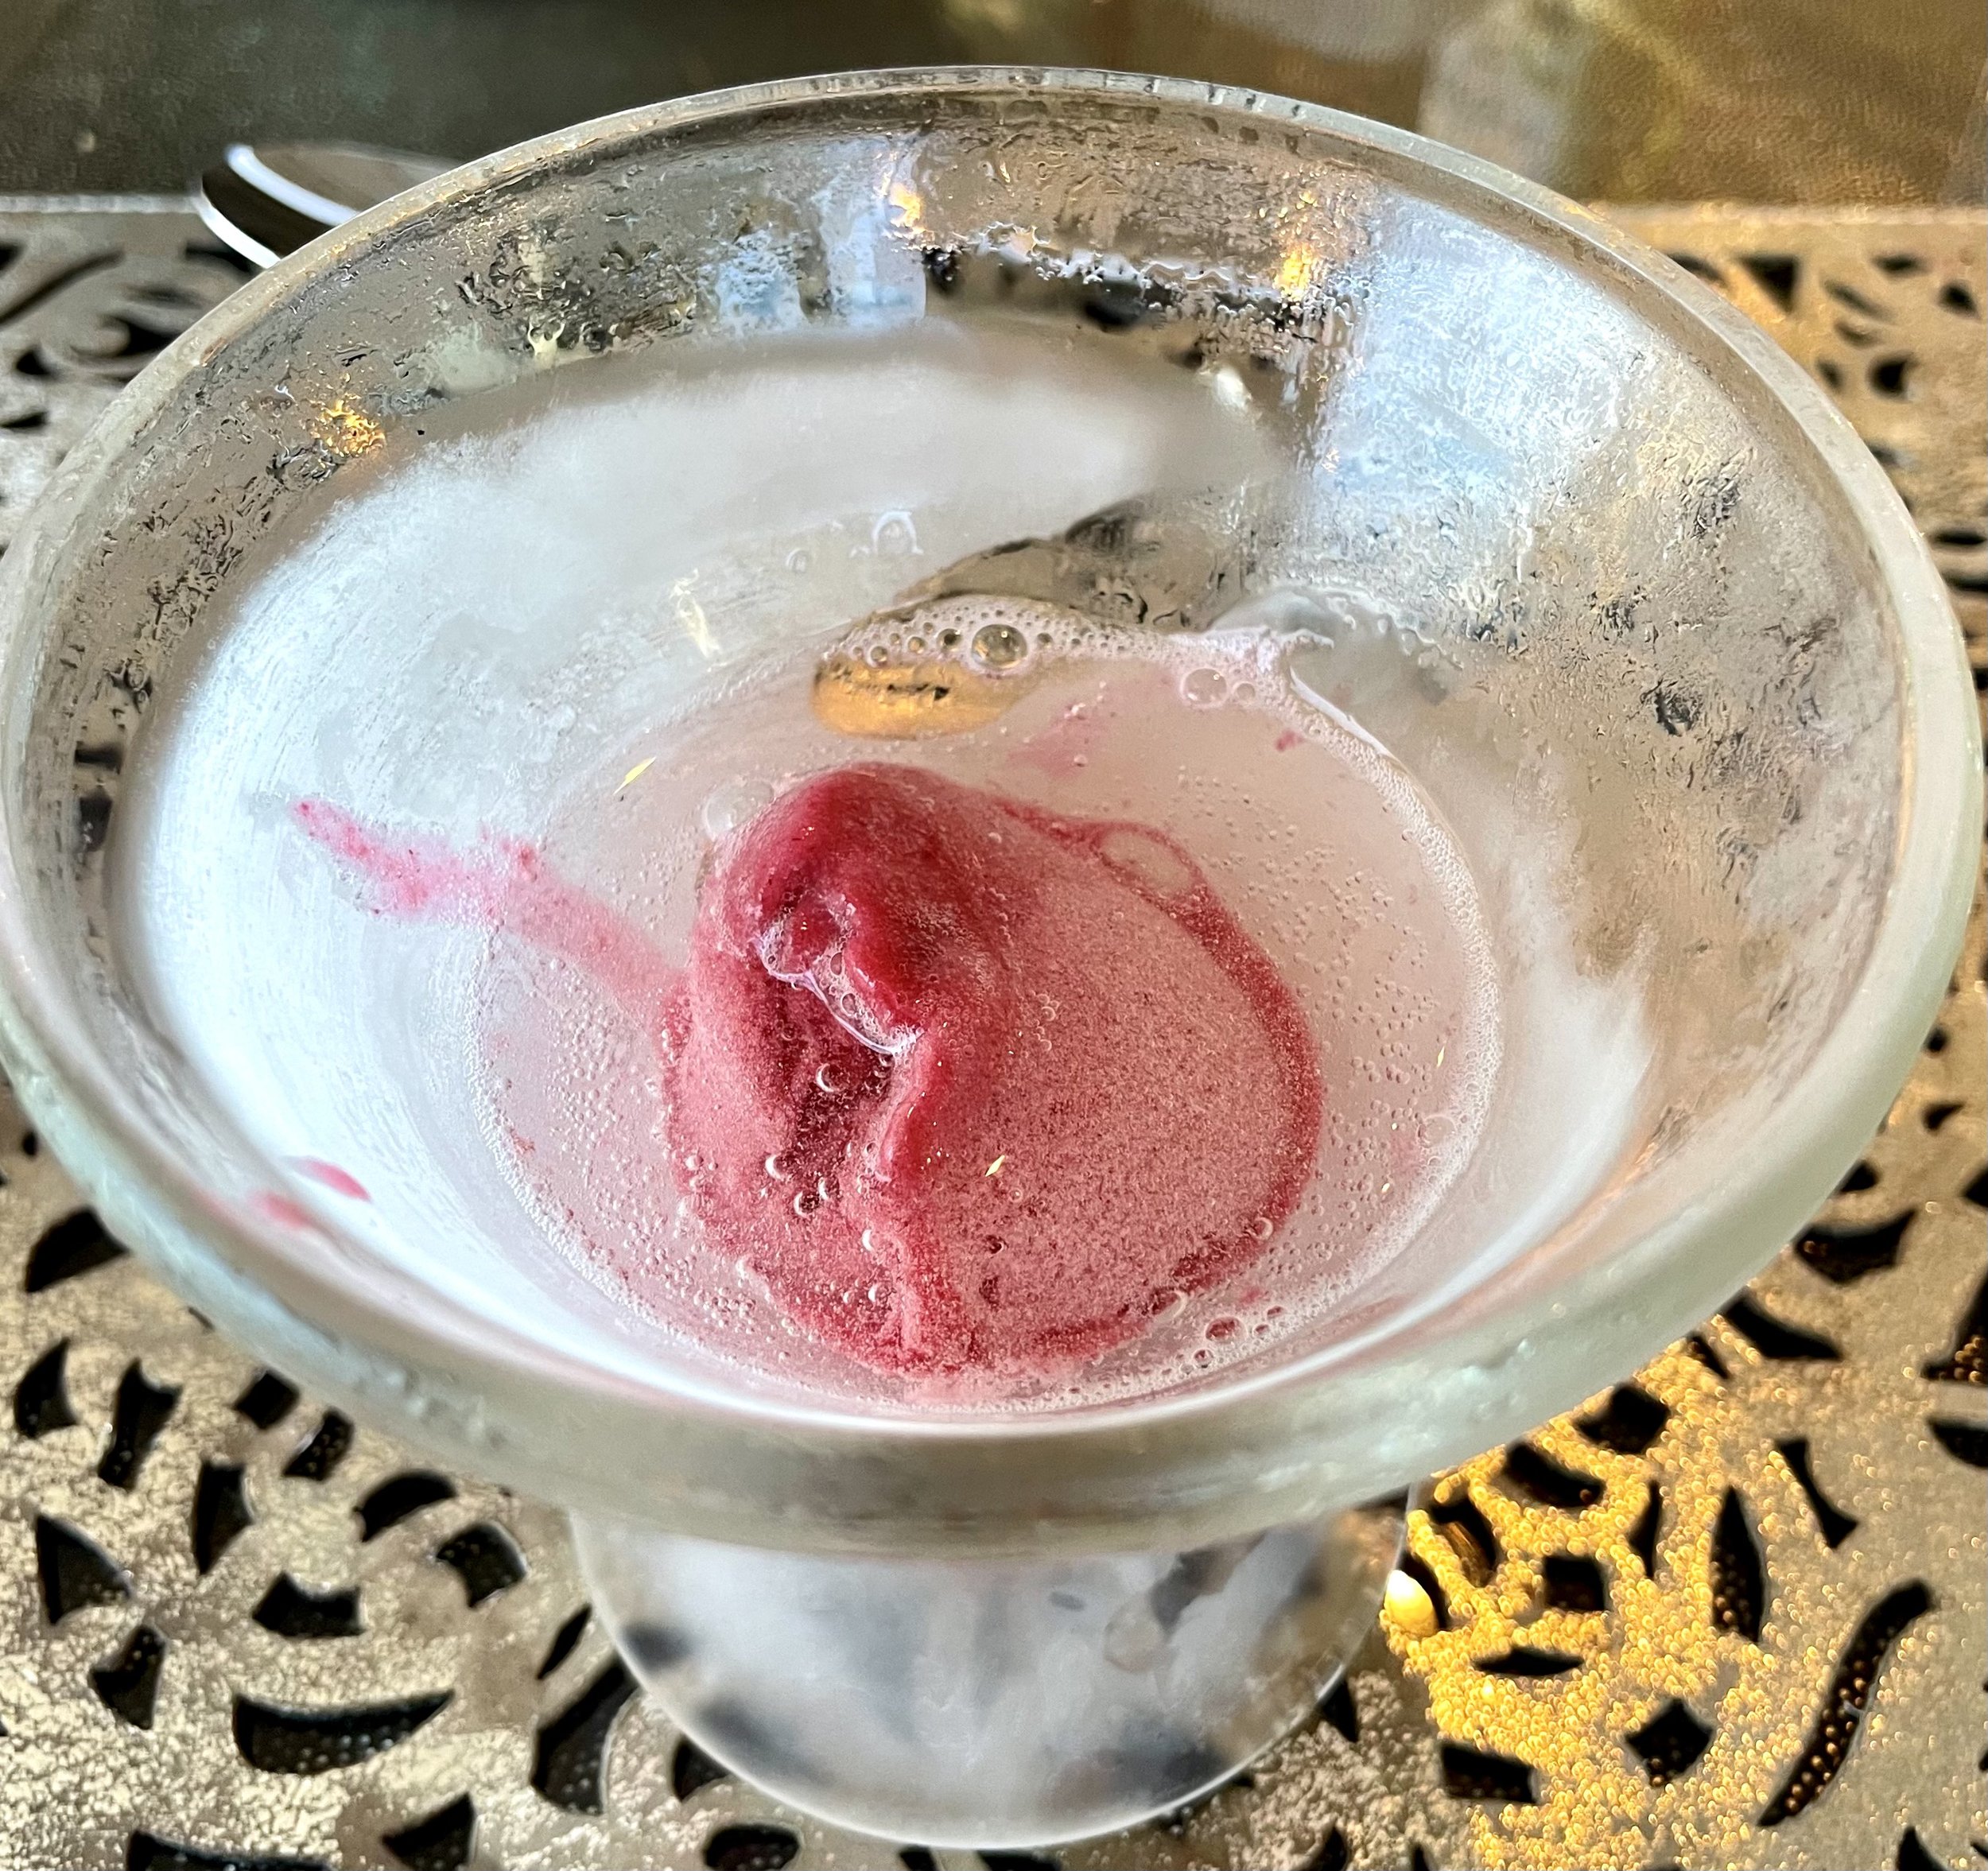  Chef’s table palate cleanser - a raspberry sorbet 